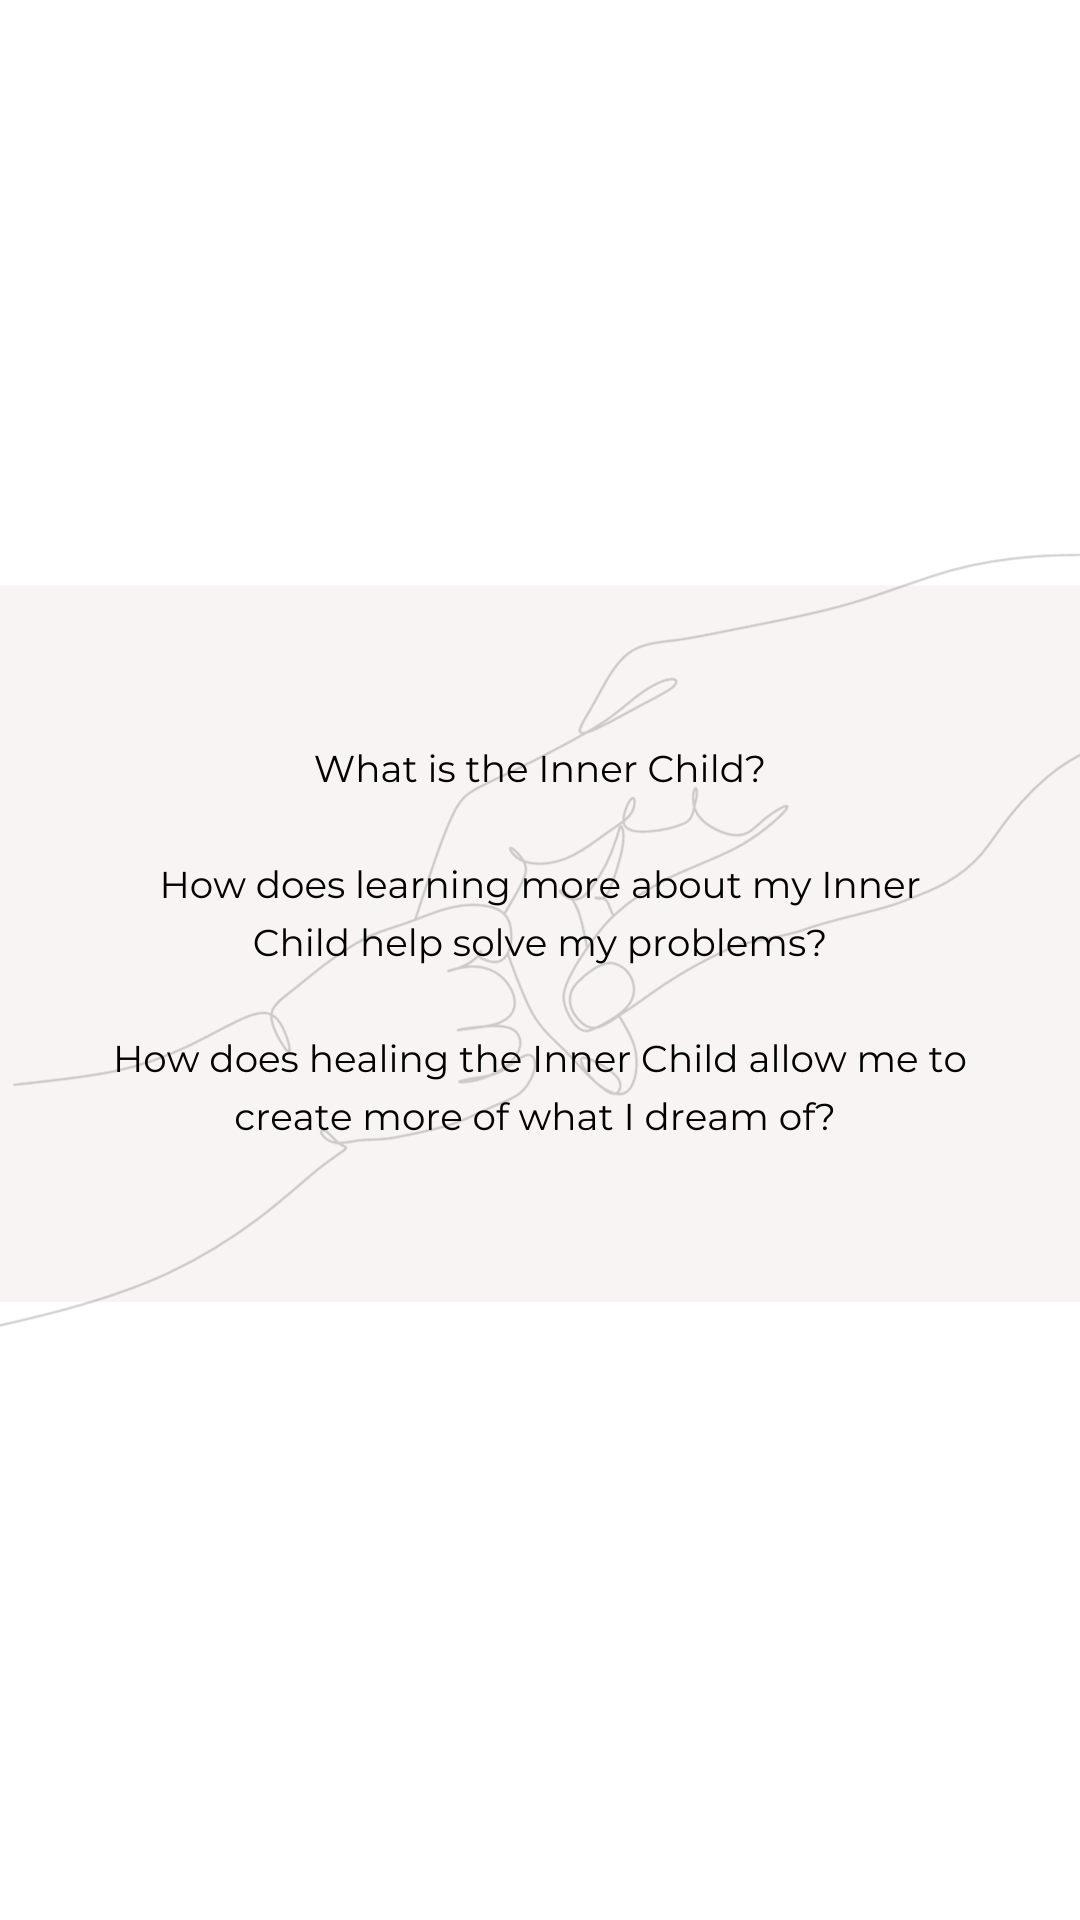 Digital Recording of Intro to the Inner Child Course